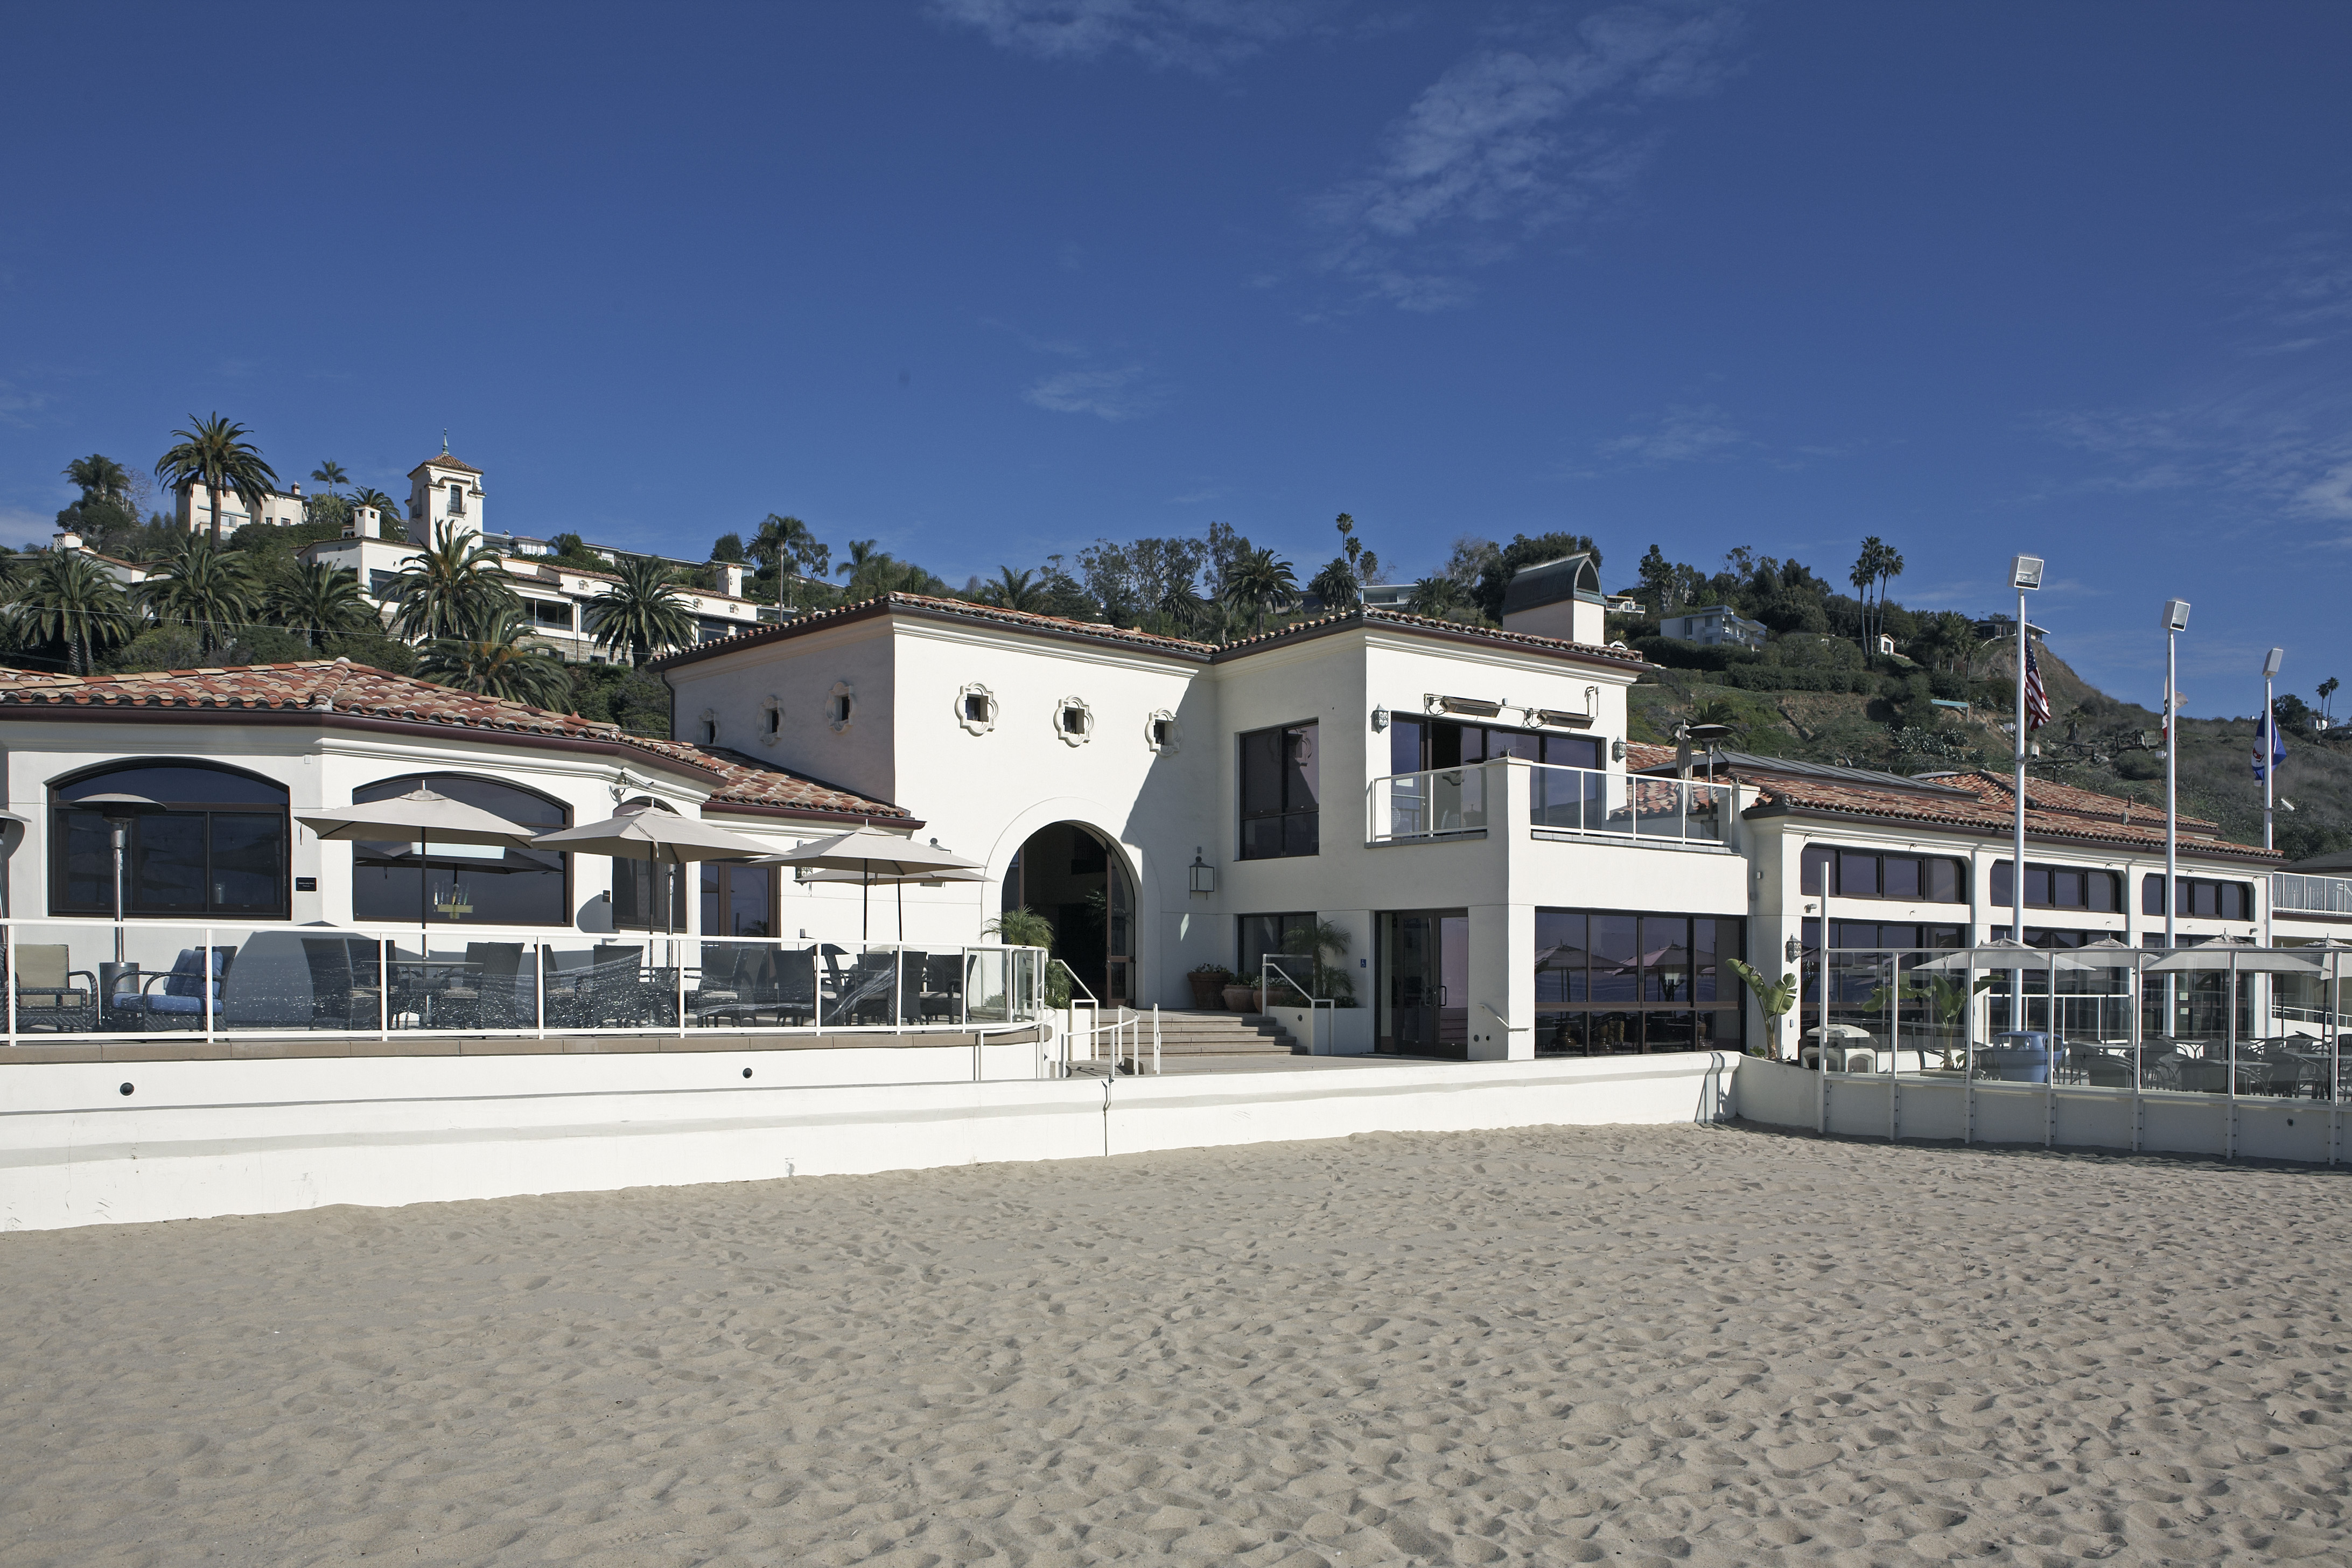 Bel Air Bay Club Expansion | House & Robertson Architects, Inc.